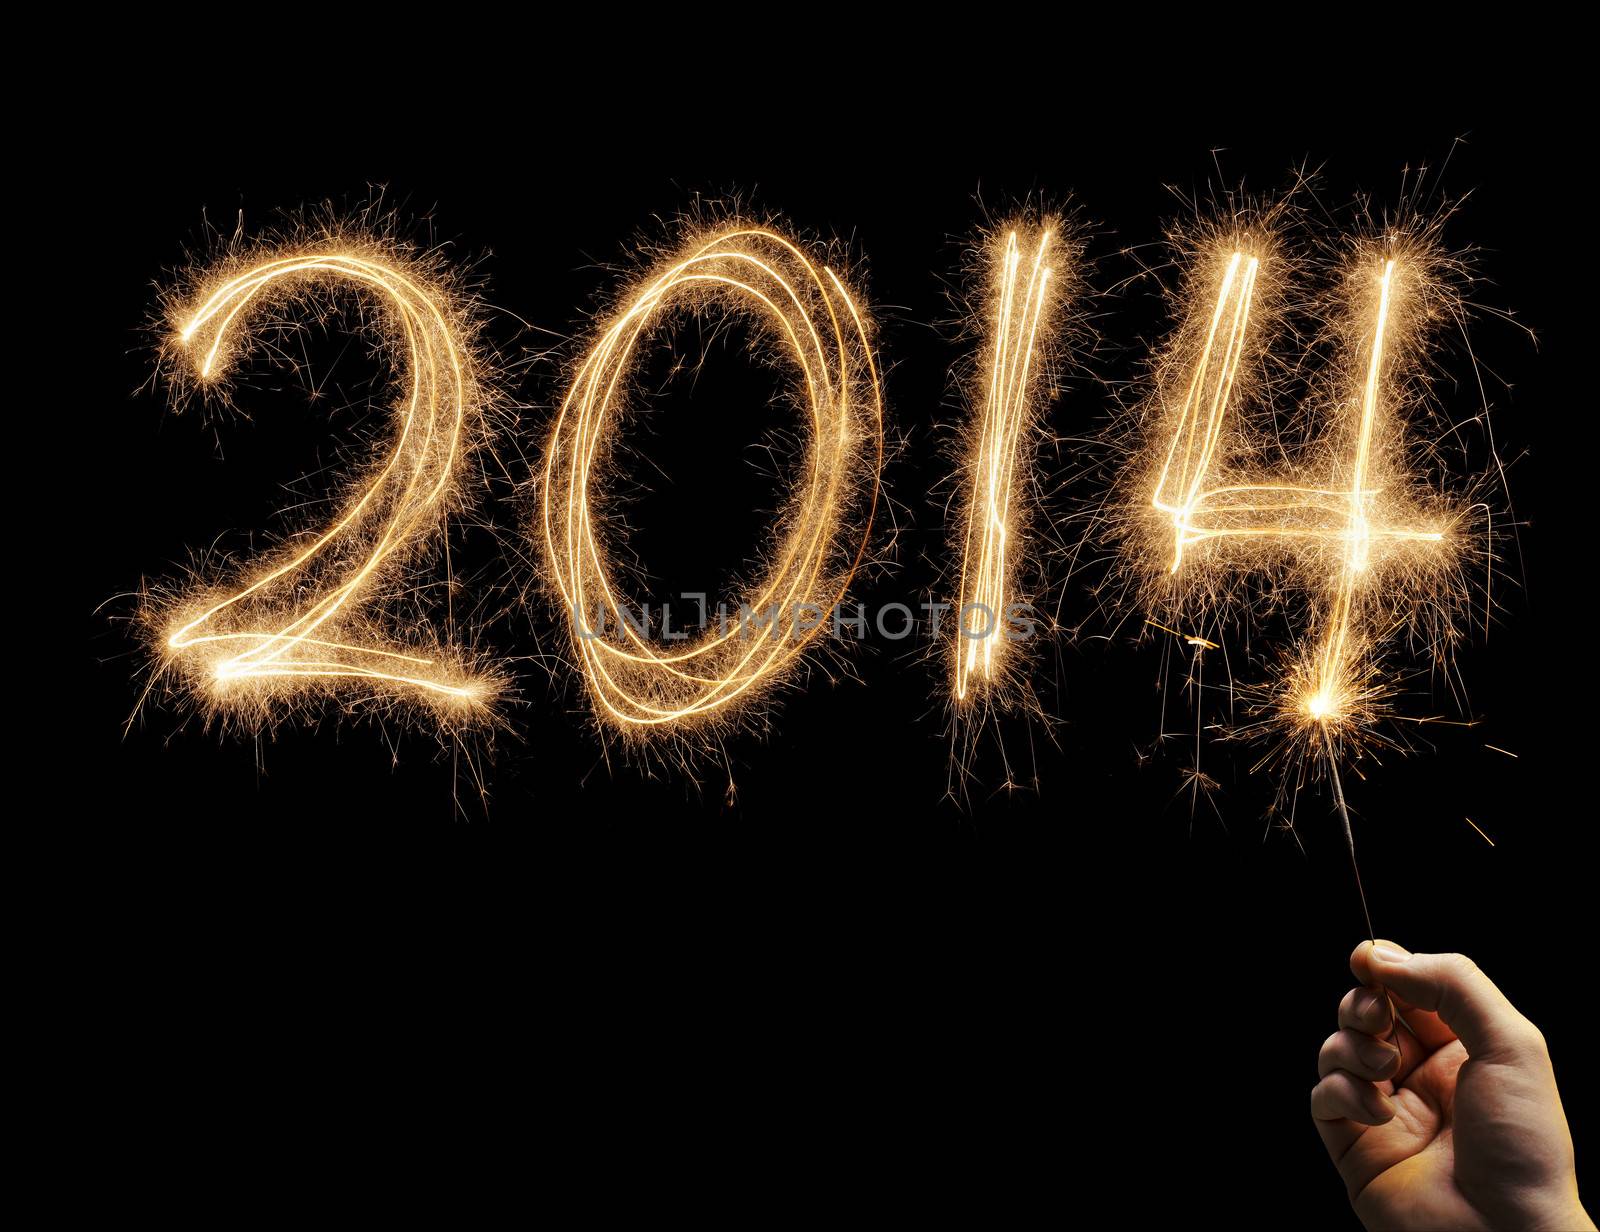 Man writing number 2014 with a sparkler in his hand